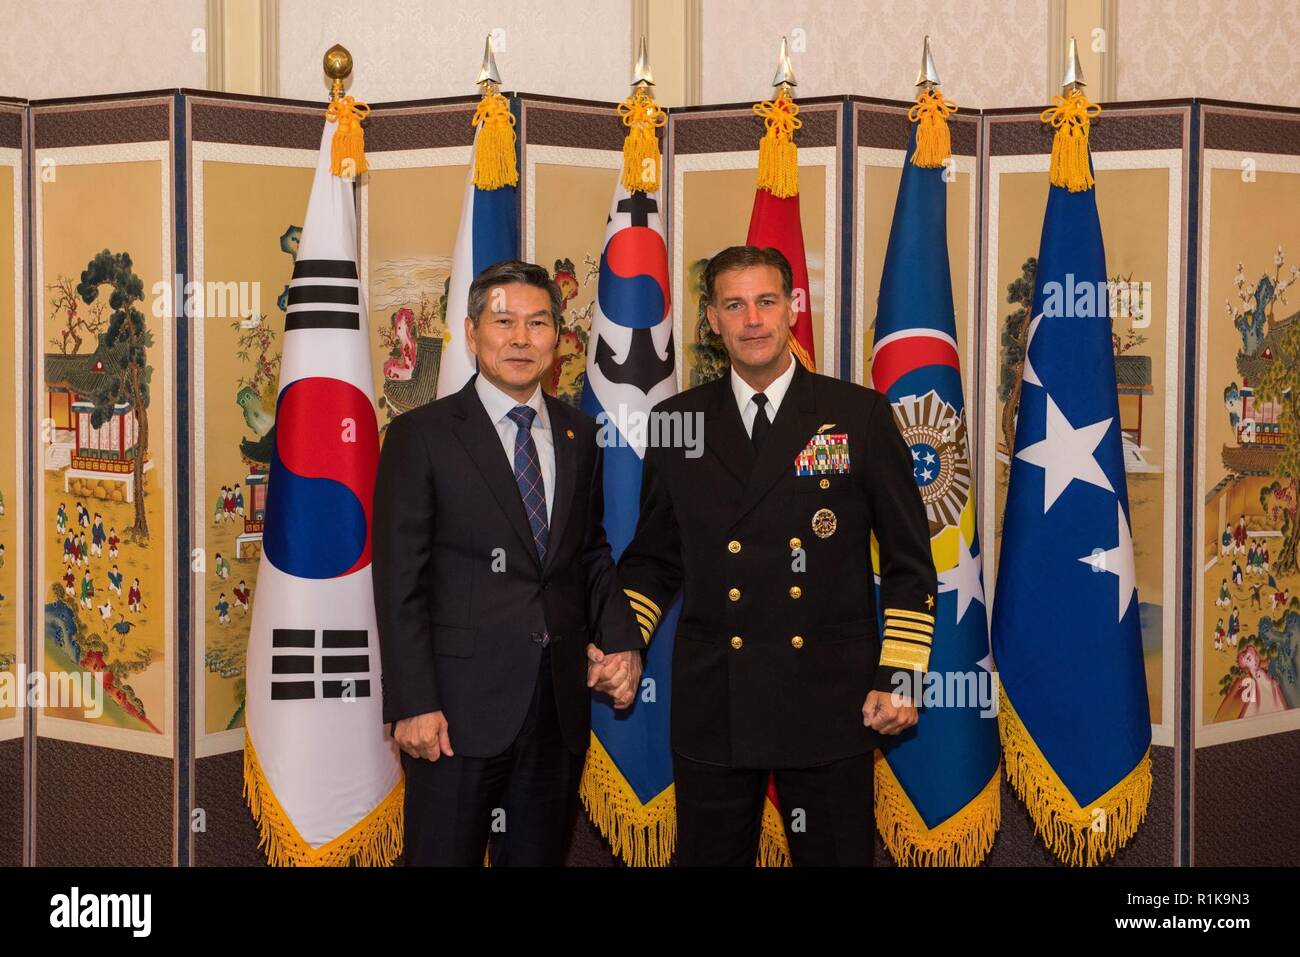 JEJU ISLAND, Republic of Korea, Republic of Korea (Oct. 12, 2018) Minister Jeong, Kyeong-doo, ROK Minister of National Defense, and Adm. John Aquilino, commander, U.S. Pacific Fleet, pose together for a photo during an office call in Jeju. Aquilino is visiting the ROK to observe the 2018 ROK International Fleet review as well as attend the 2018 Western Pacific Naval Symposium being hosted by the ROK Navy. Stock Photo